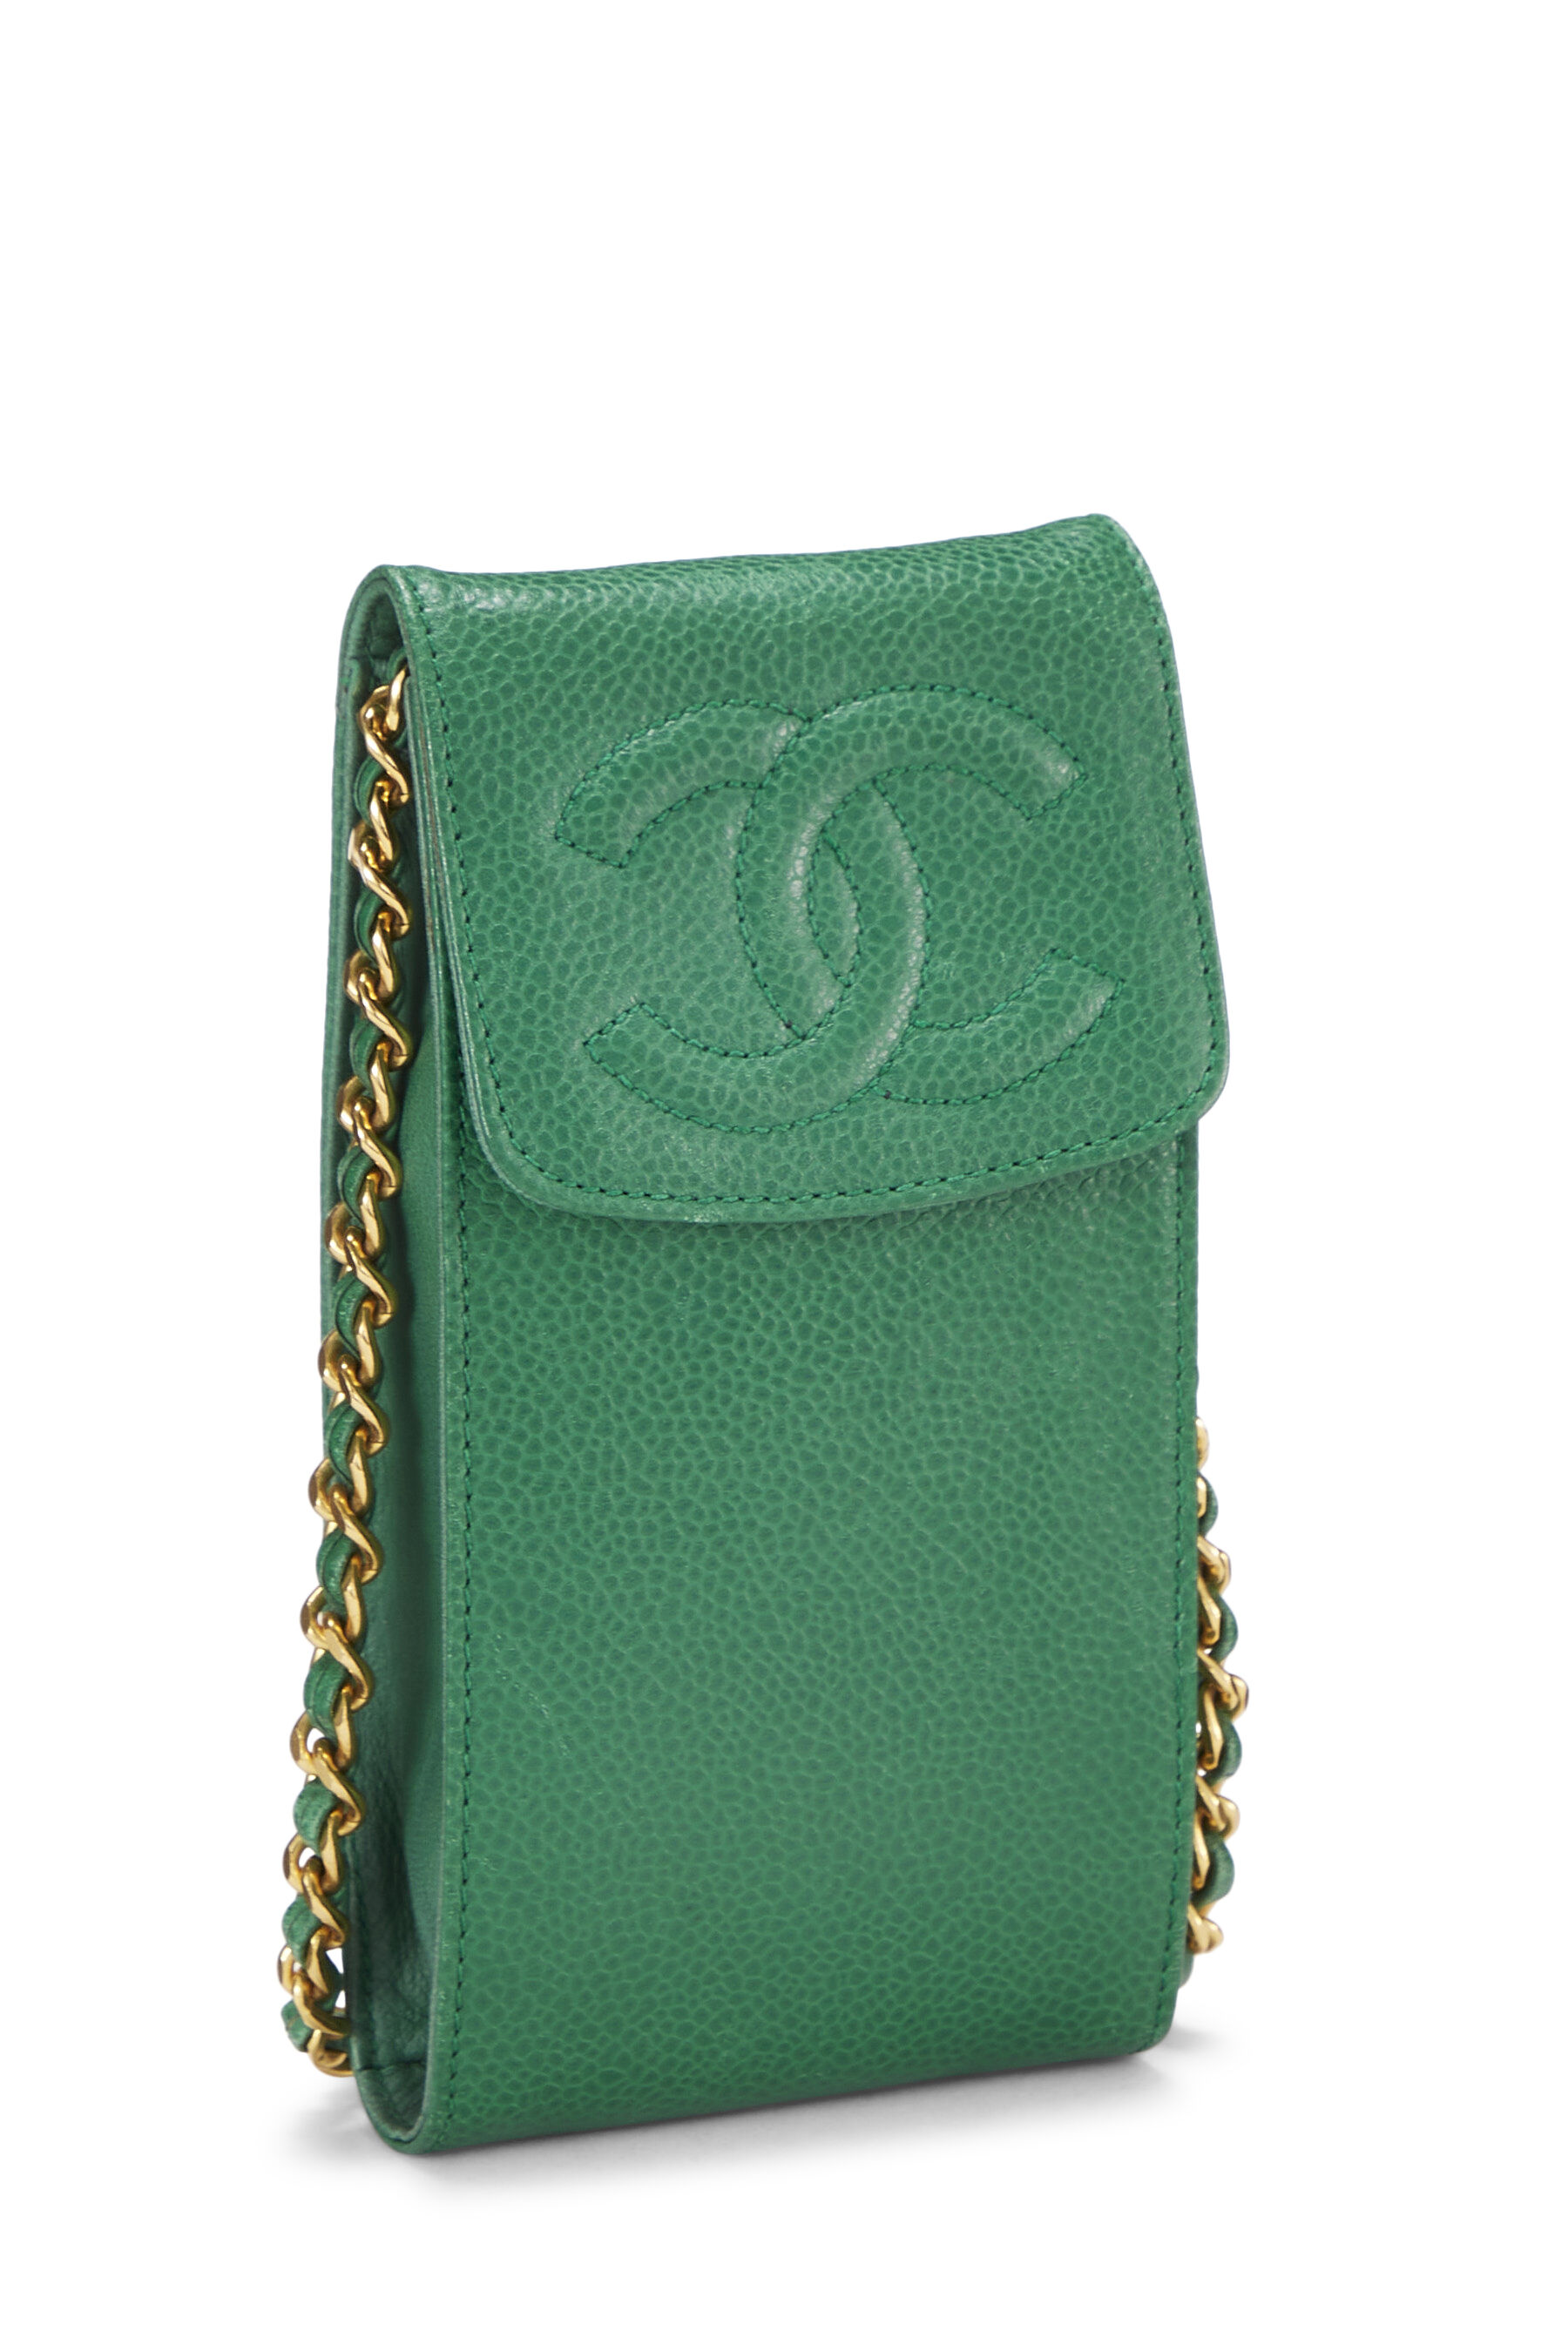 Chanel Wallet on Chain with CC Logo, 23P Green Caviar Leather Gold  Hardware, New in Box MA001